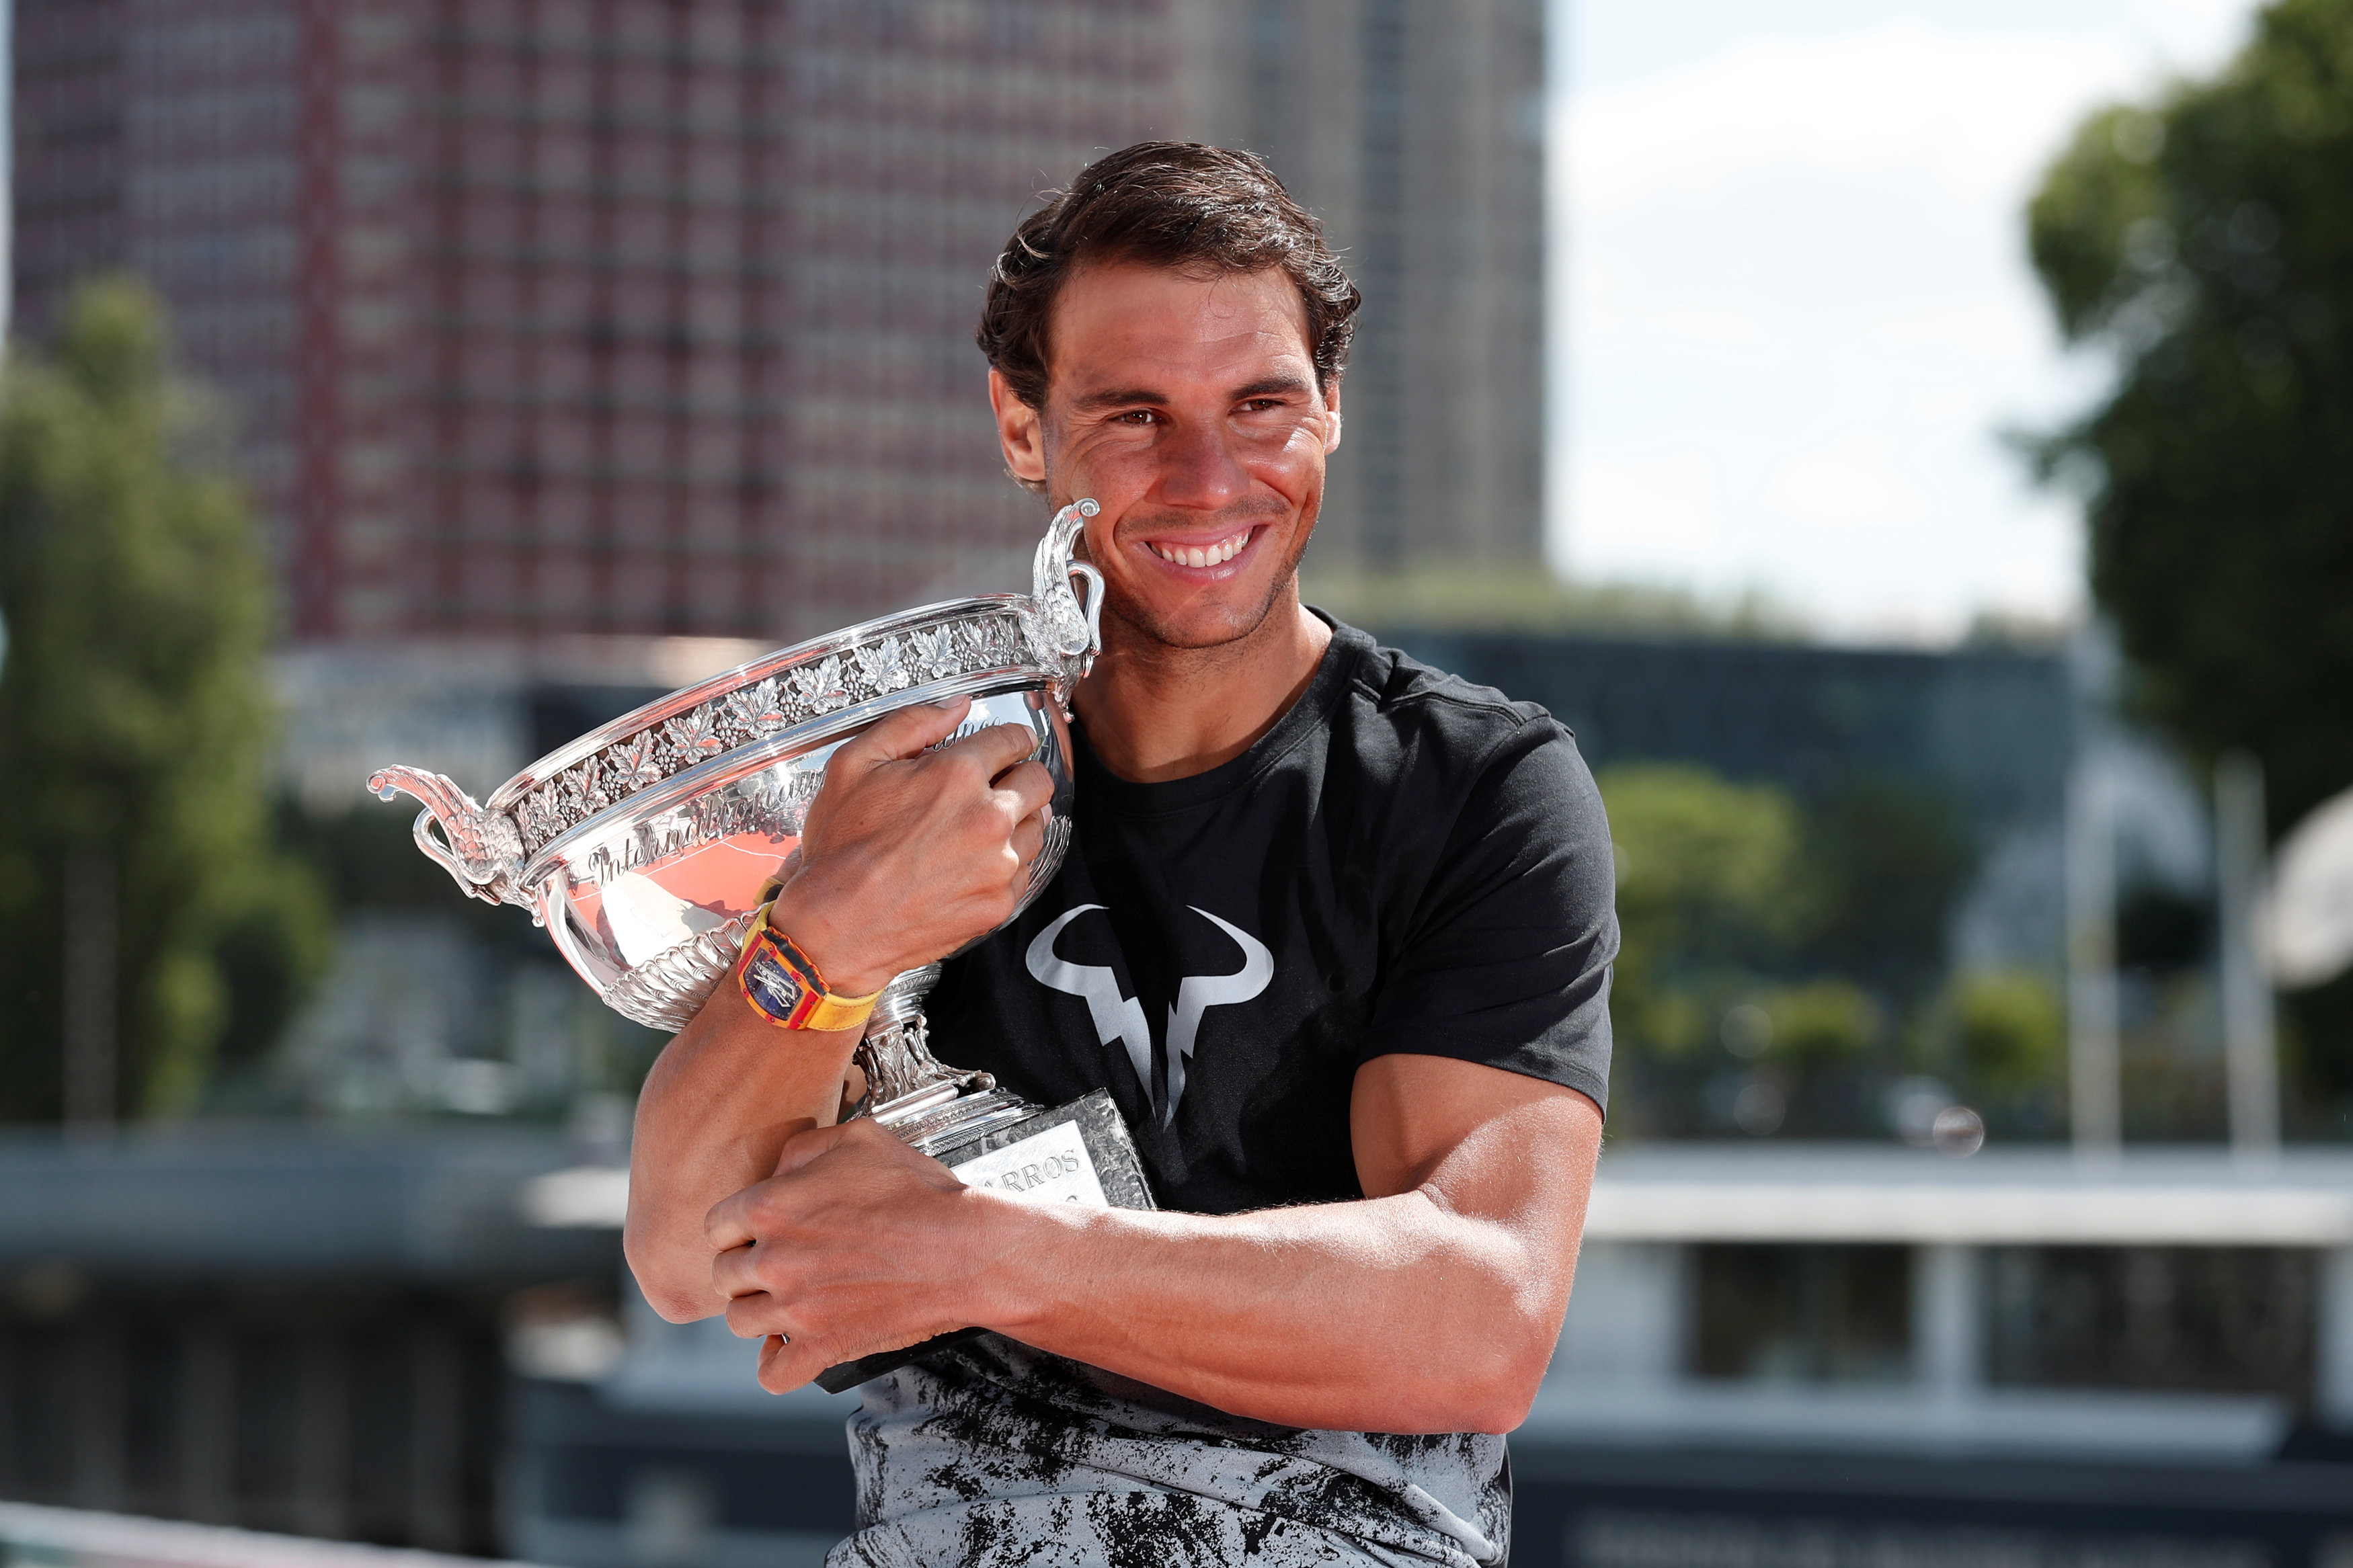 Tennis Rafael Nadal first to qualify for ATP World Tour Finals